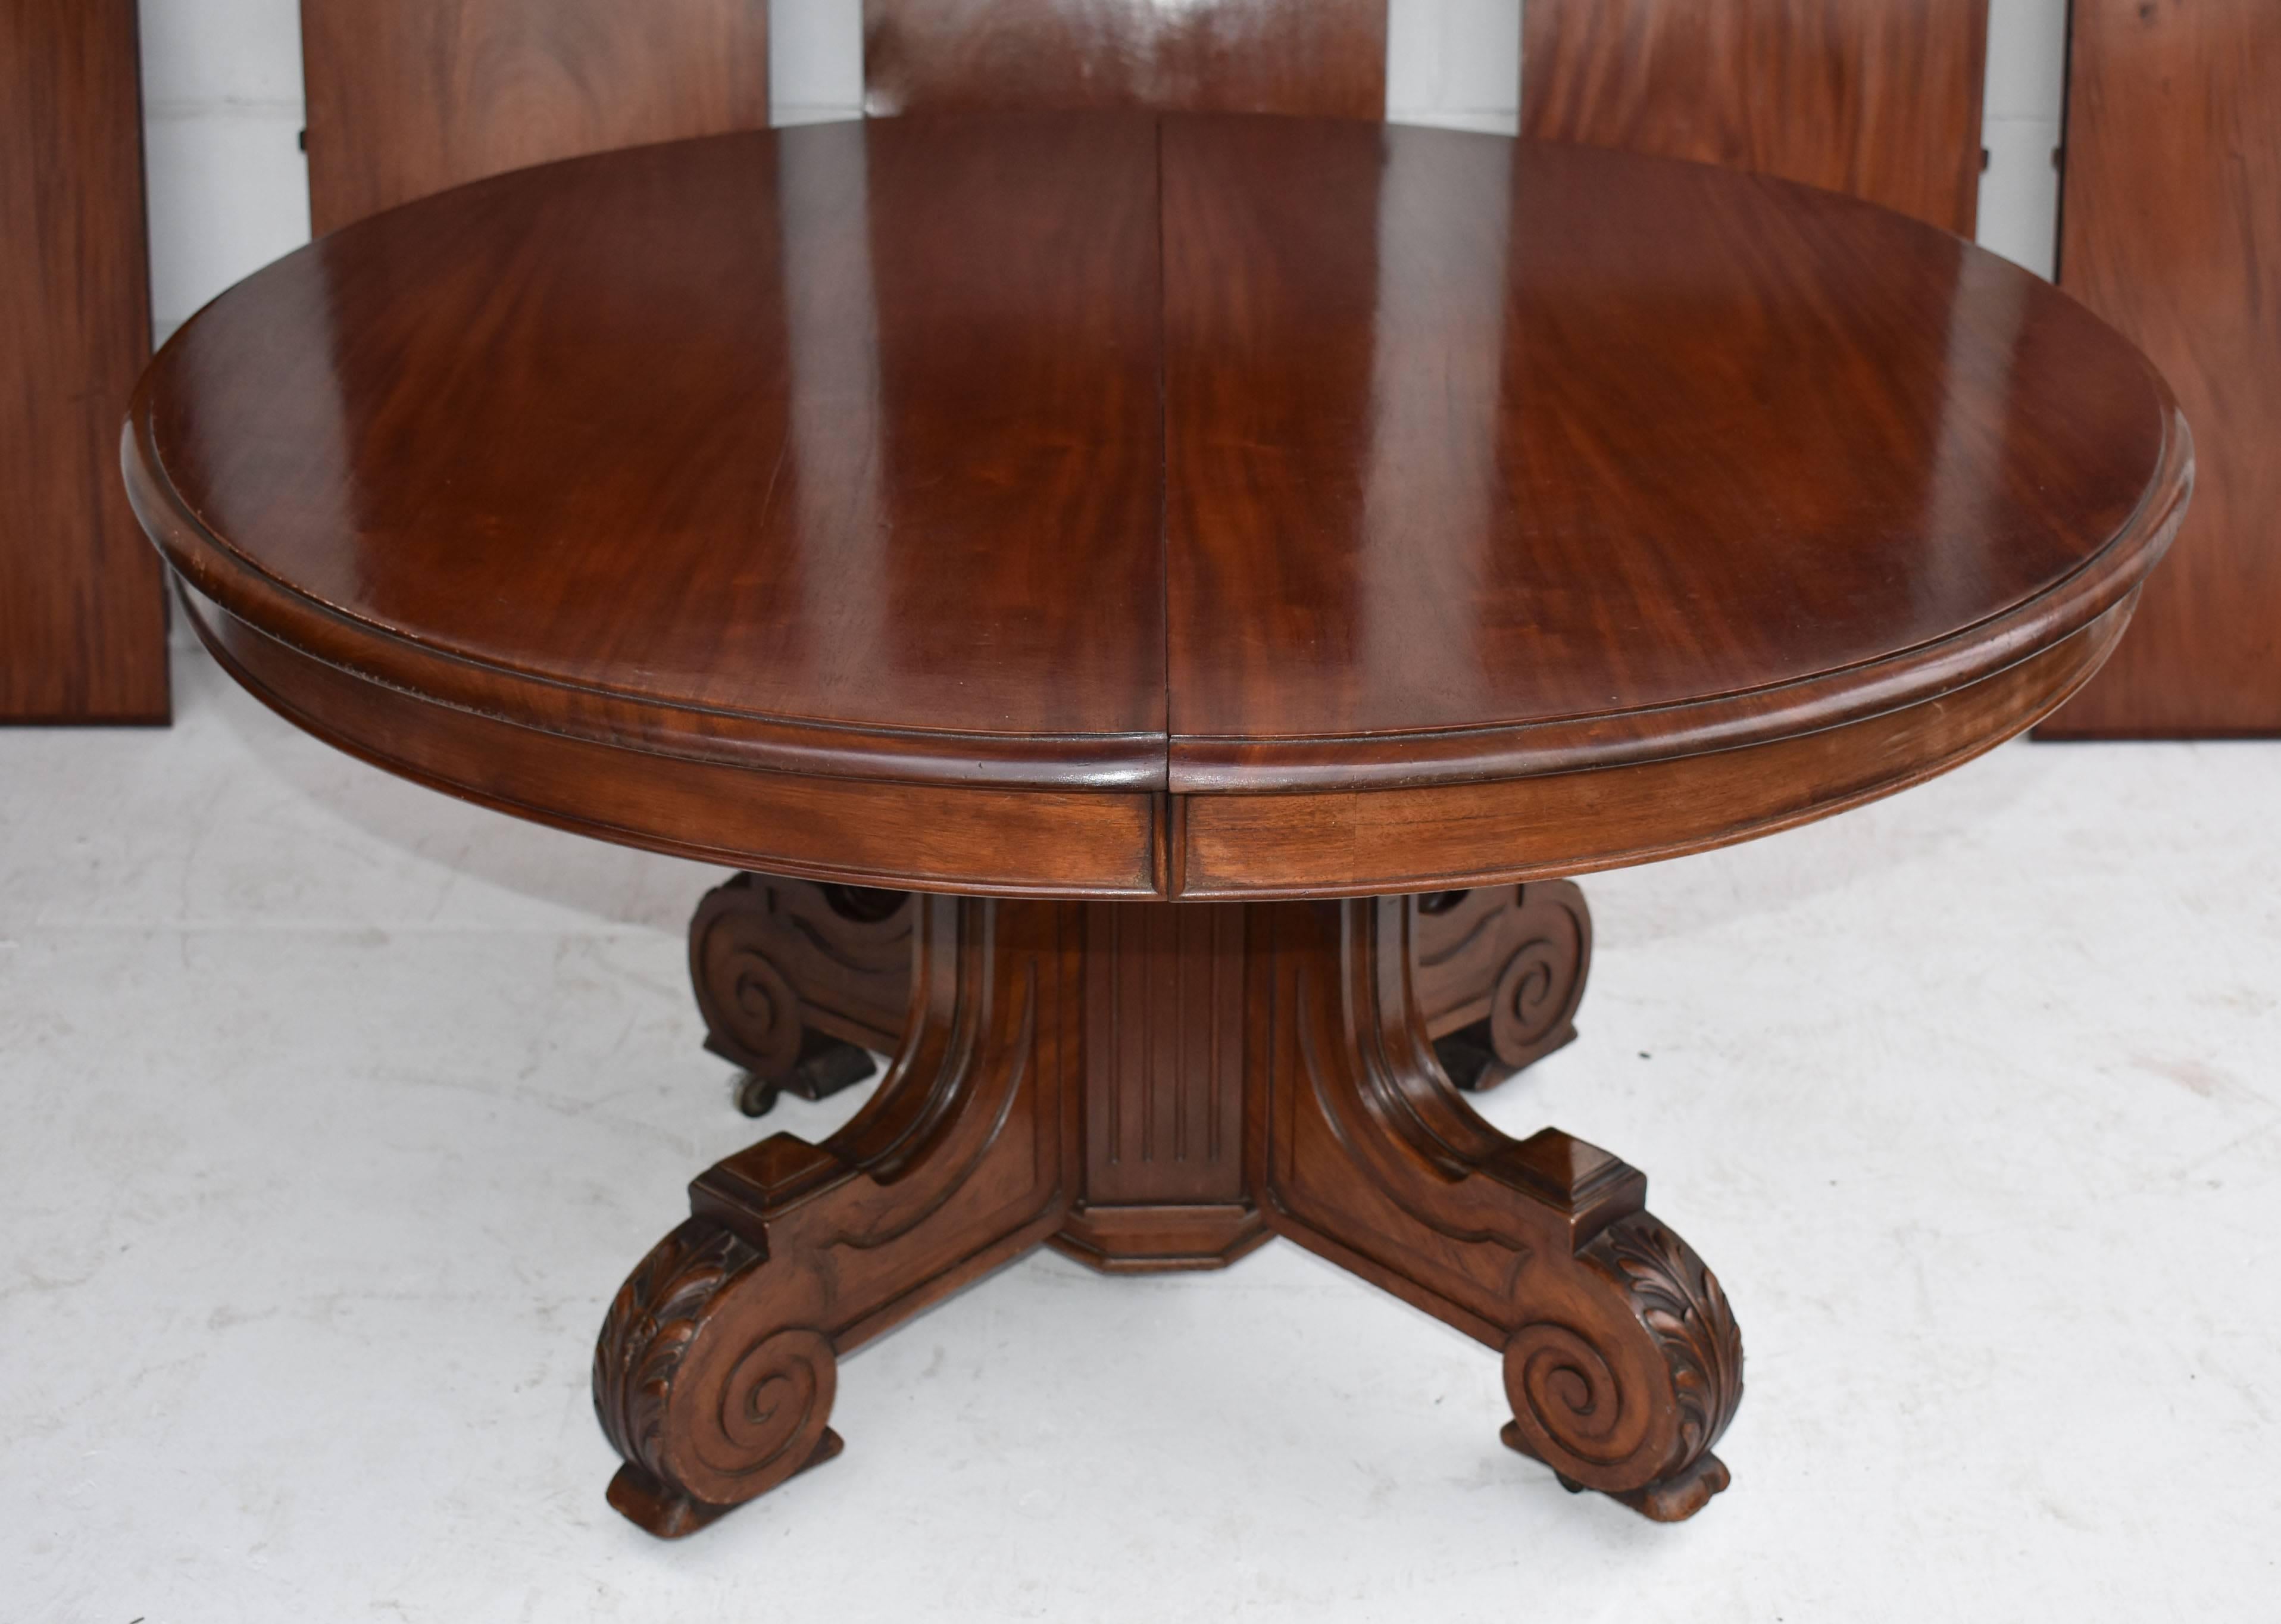 19th Century William IV Mahogany 16 Seat Dining Table For Sale 2